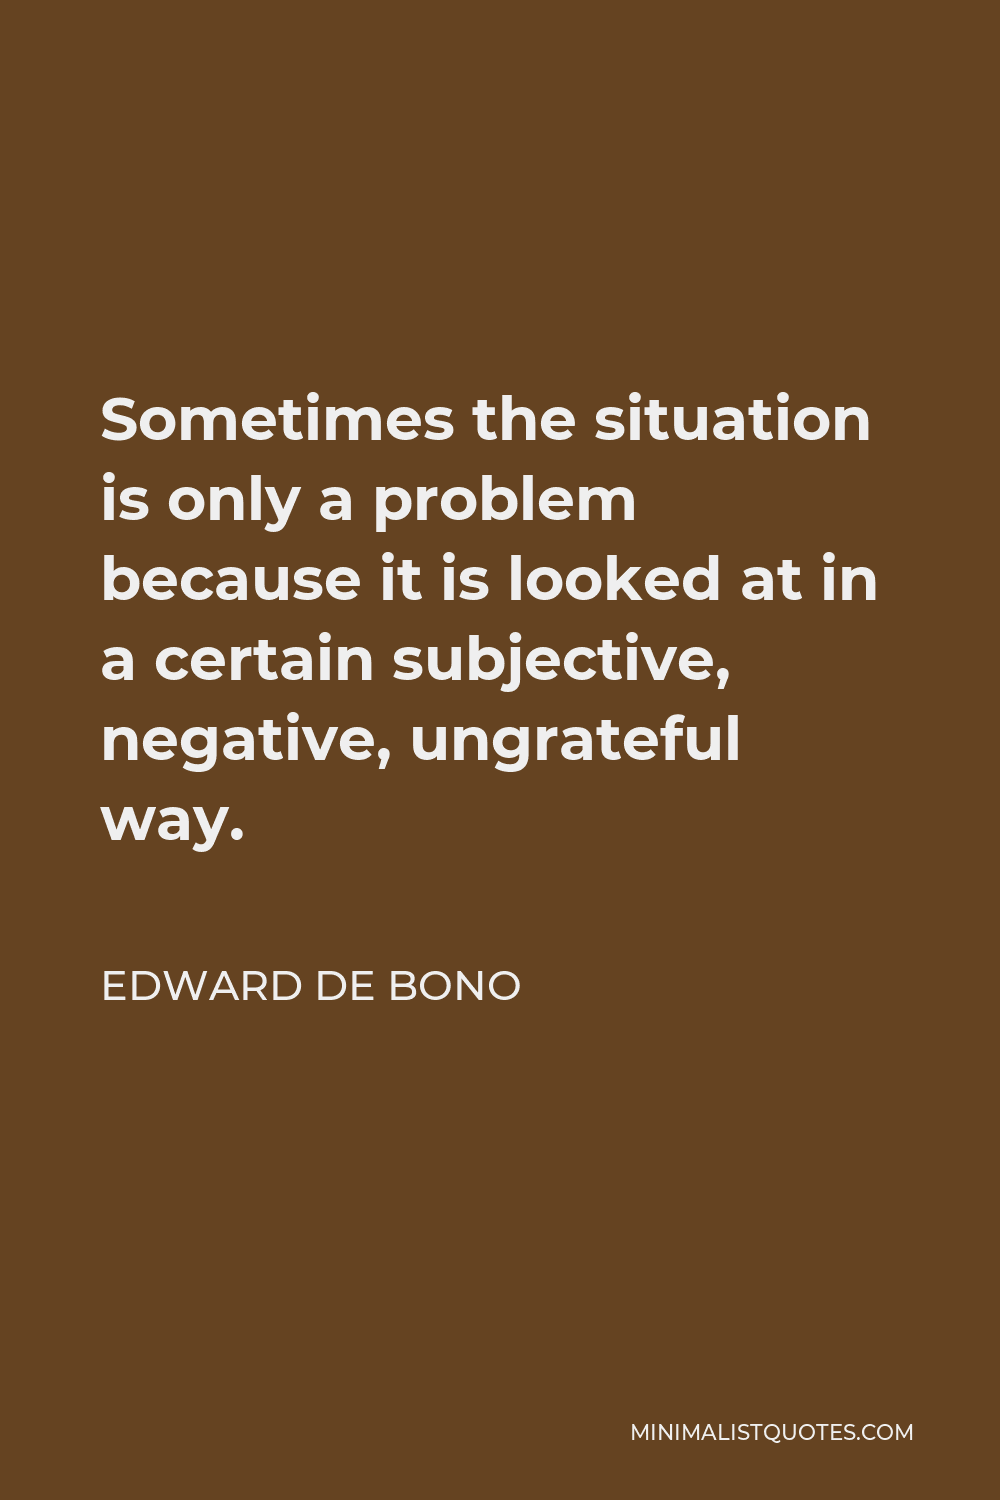 Edward de Bono Quote - Sometimes the situation is only a problem because it is looked at in a certain subjective, negative, ungrateful way.